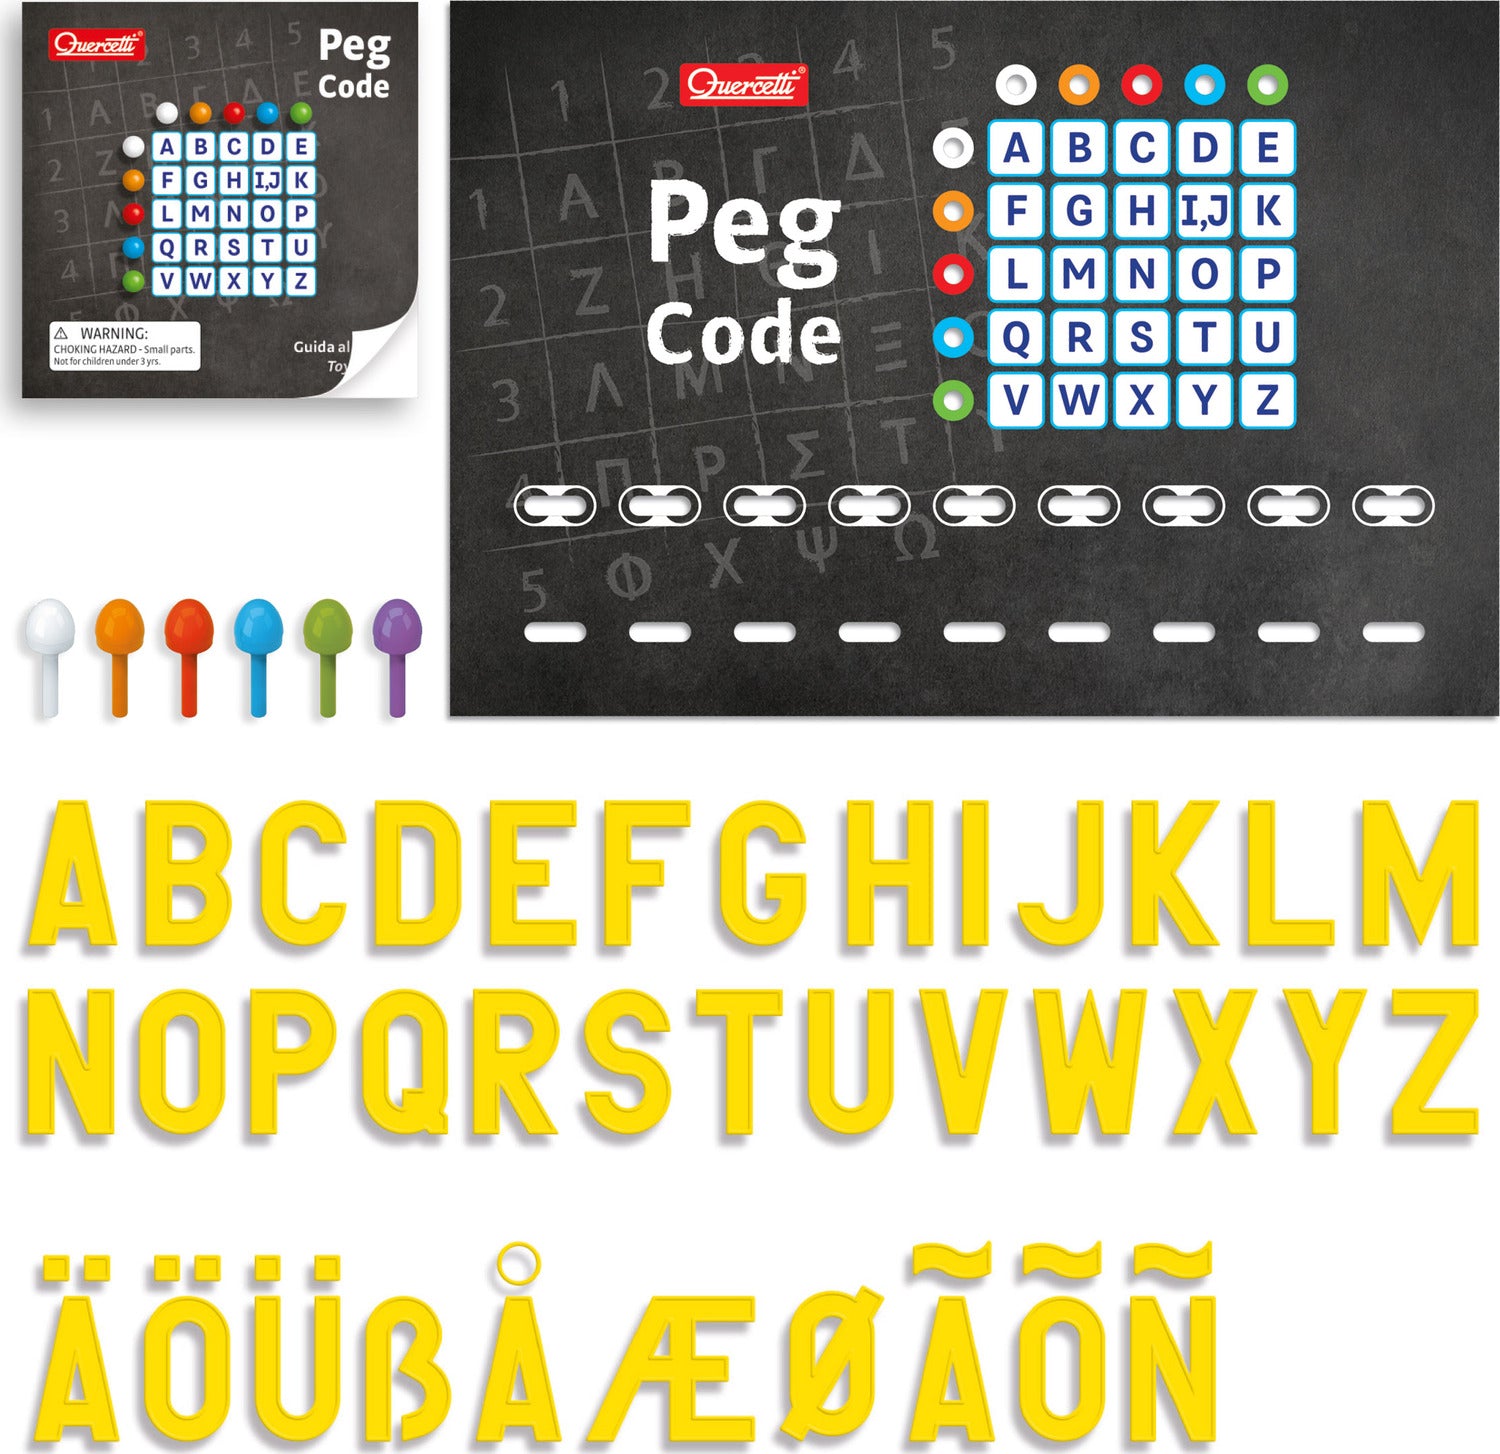 Peg Code Peg and Letters in Co